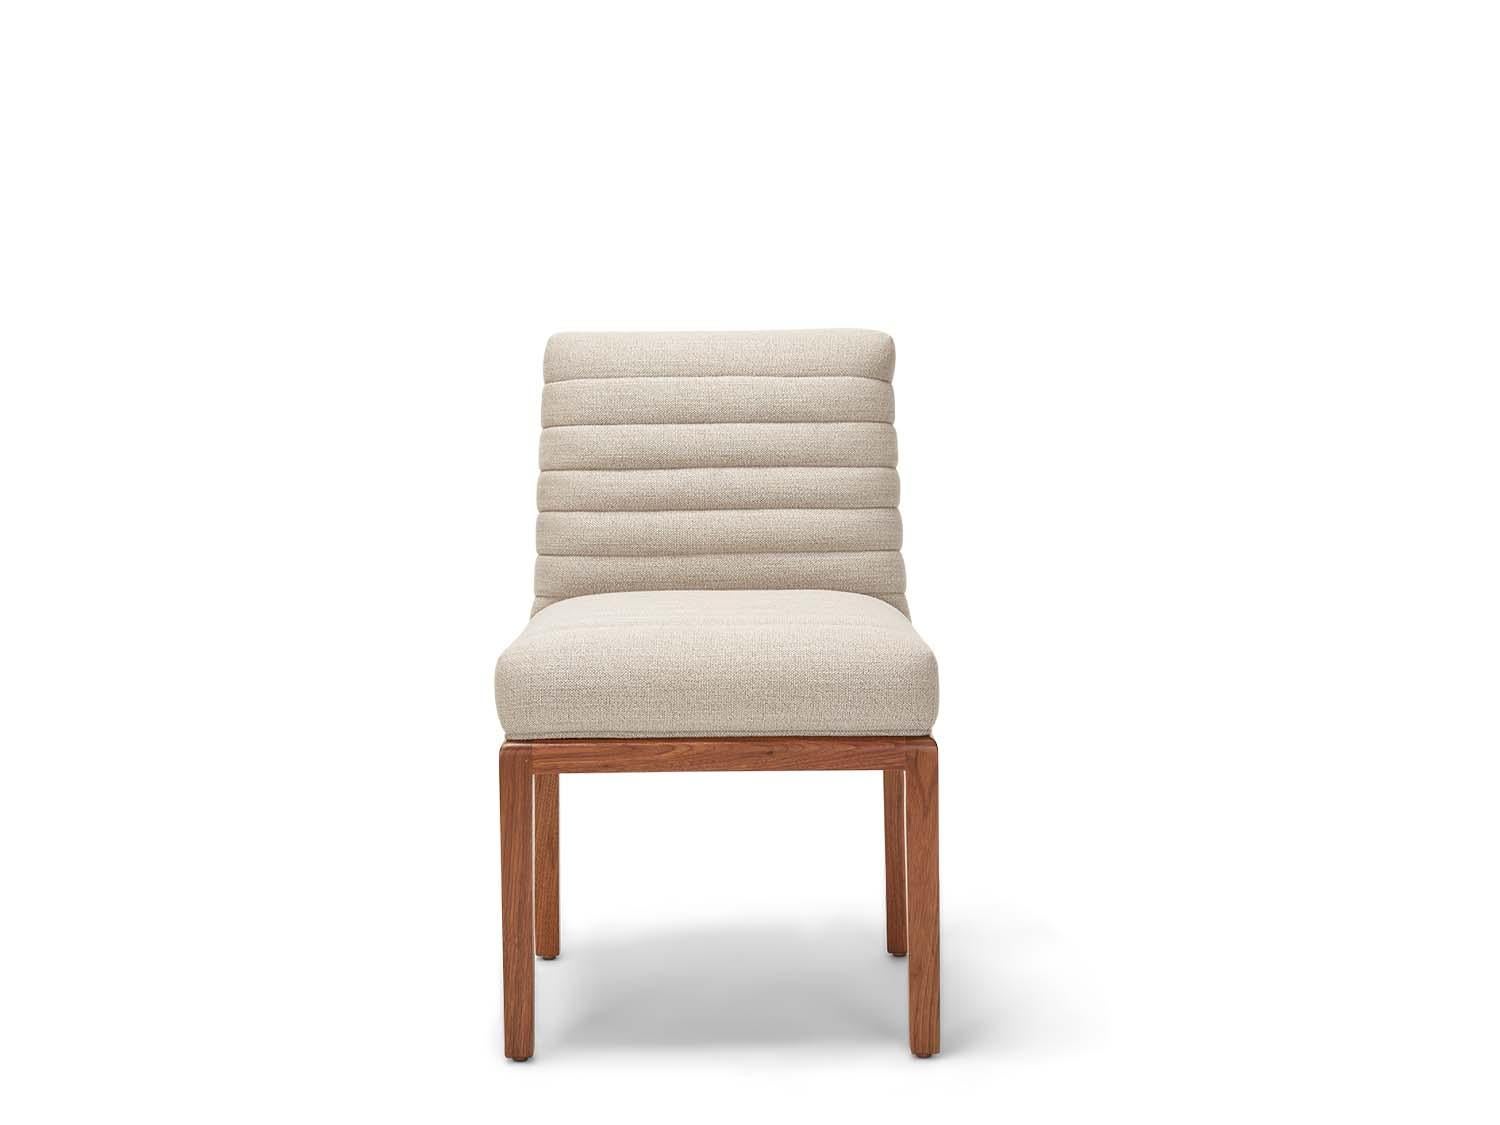 The Shoreland chair is part of the collaborative collection with interior designer Brian Paquette. The dining chair features a channel tufted back and seat with a solid American walnut or white oak frame. This piece is available in exclusive BP for